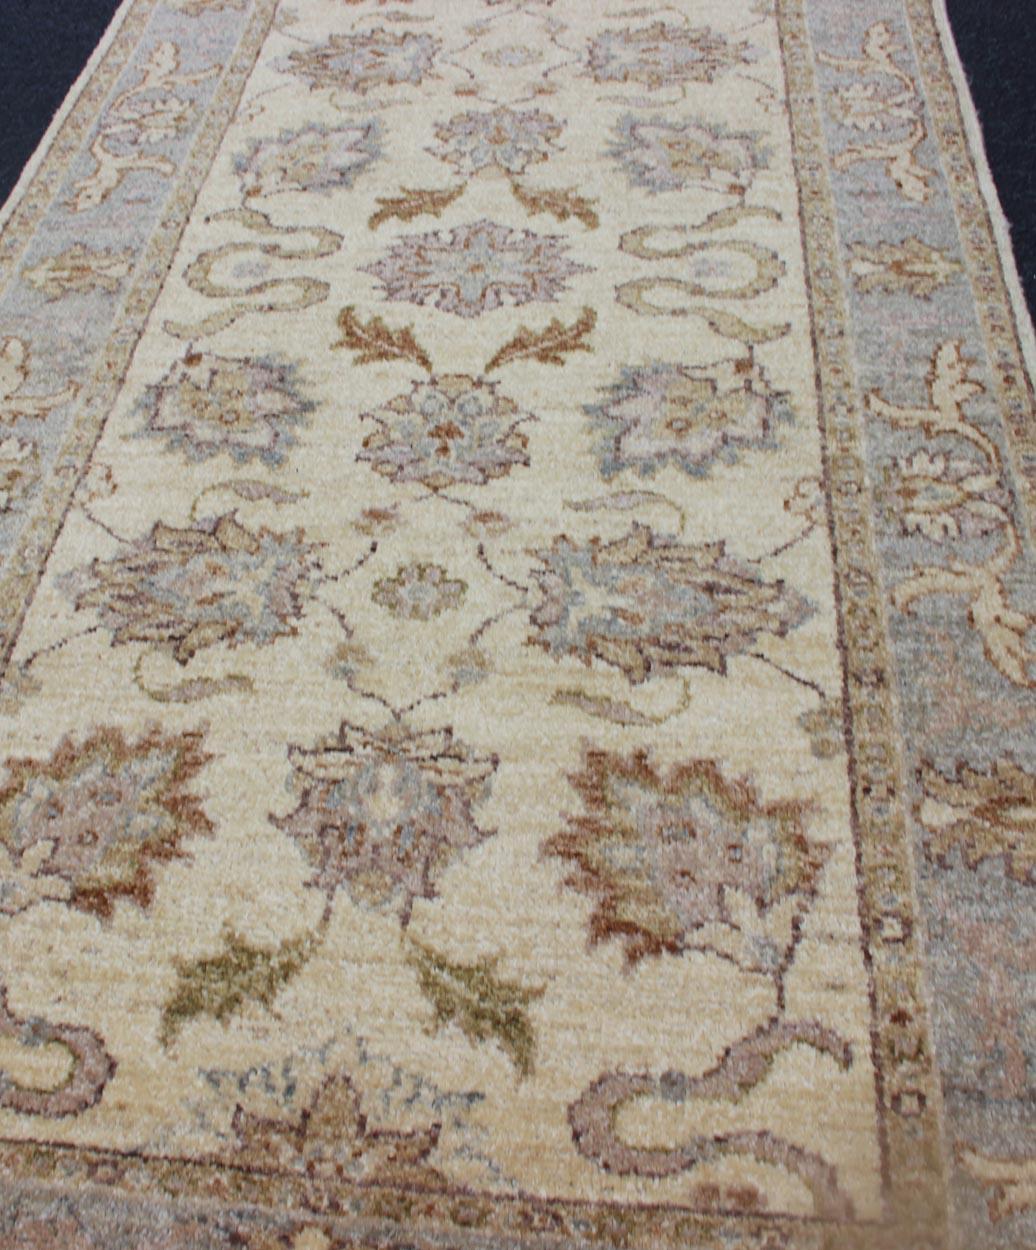 Wool Modern Afghan Floral Pattern Short Runner in Earth Tones with Browns and Cream For Sale